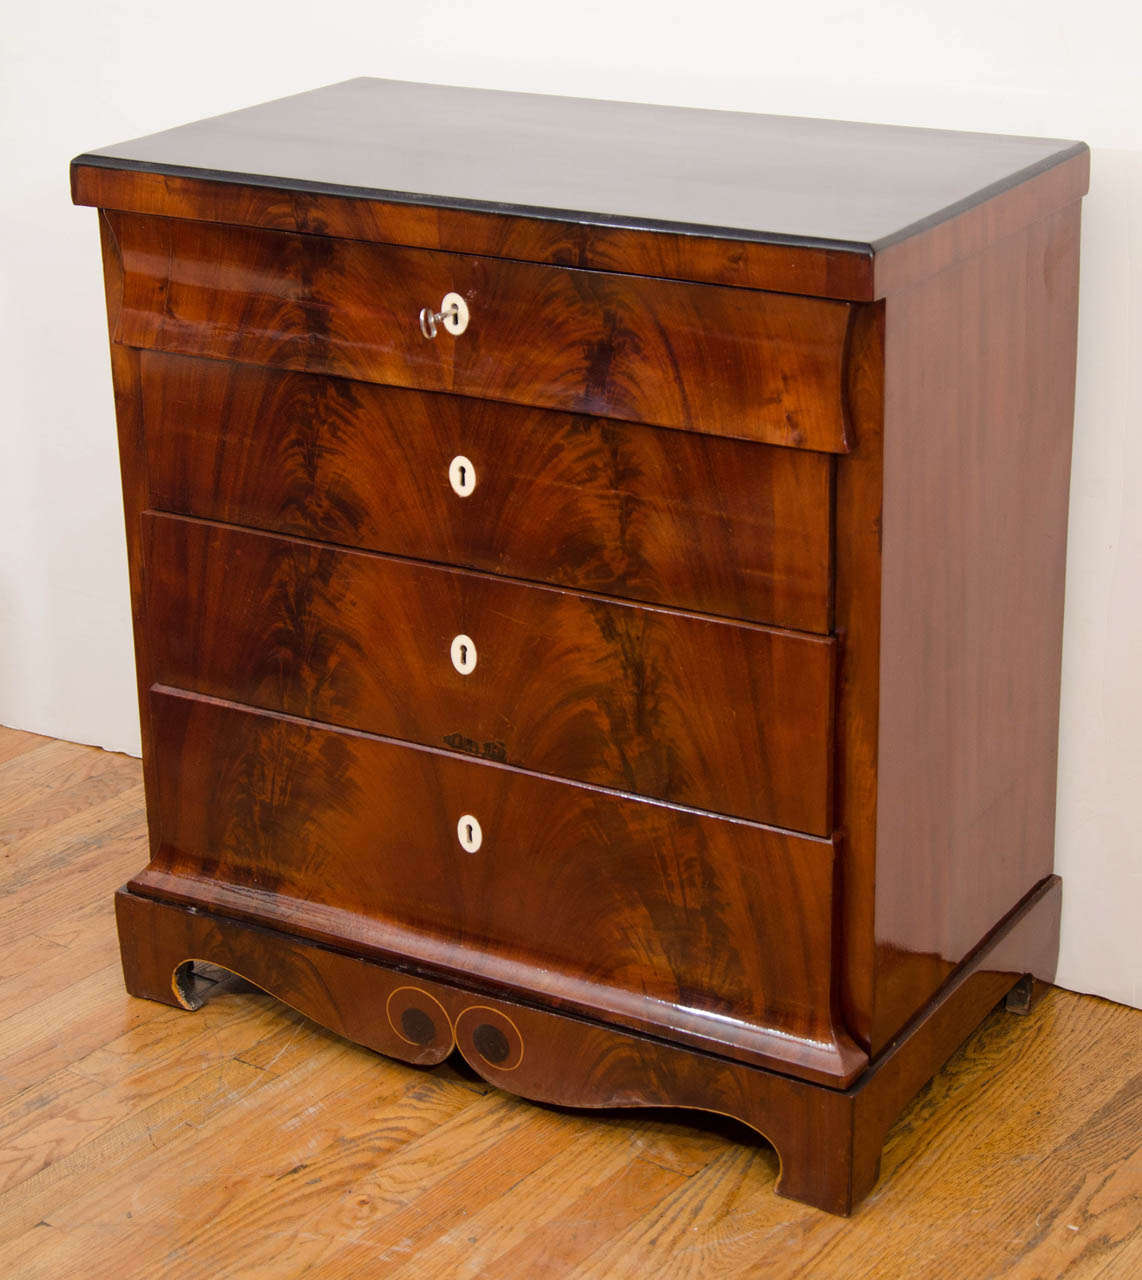 Elegant and restrained with four drawers, the upper and lower of which splay outwardly at the base, the chest is adorned with flame mahogany veneers which carry from the ebonized bevelled upper edge to the whimsical ebony and birch inlay of the base.